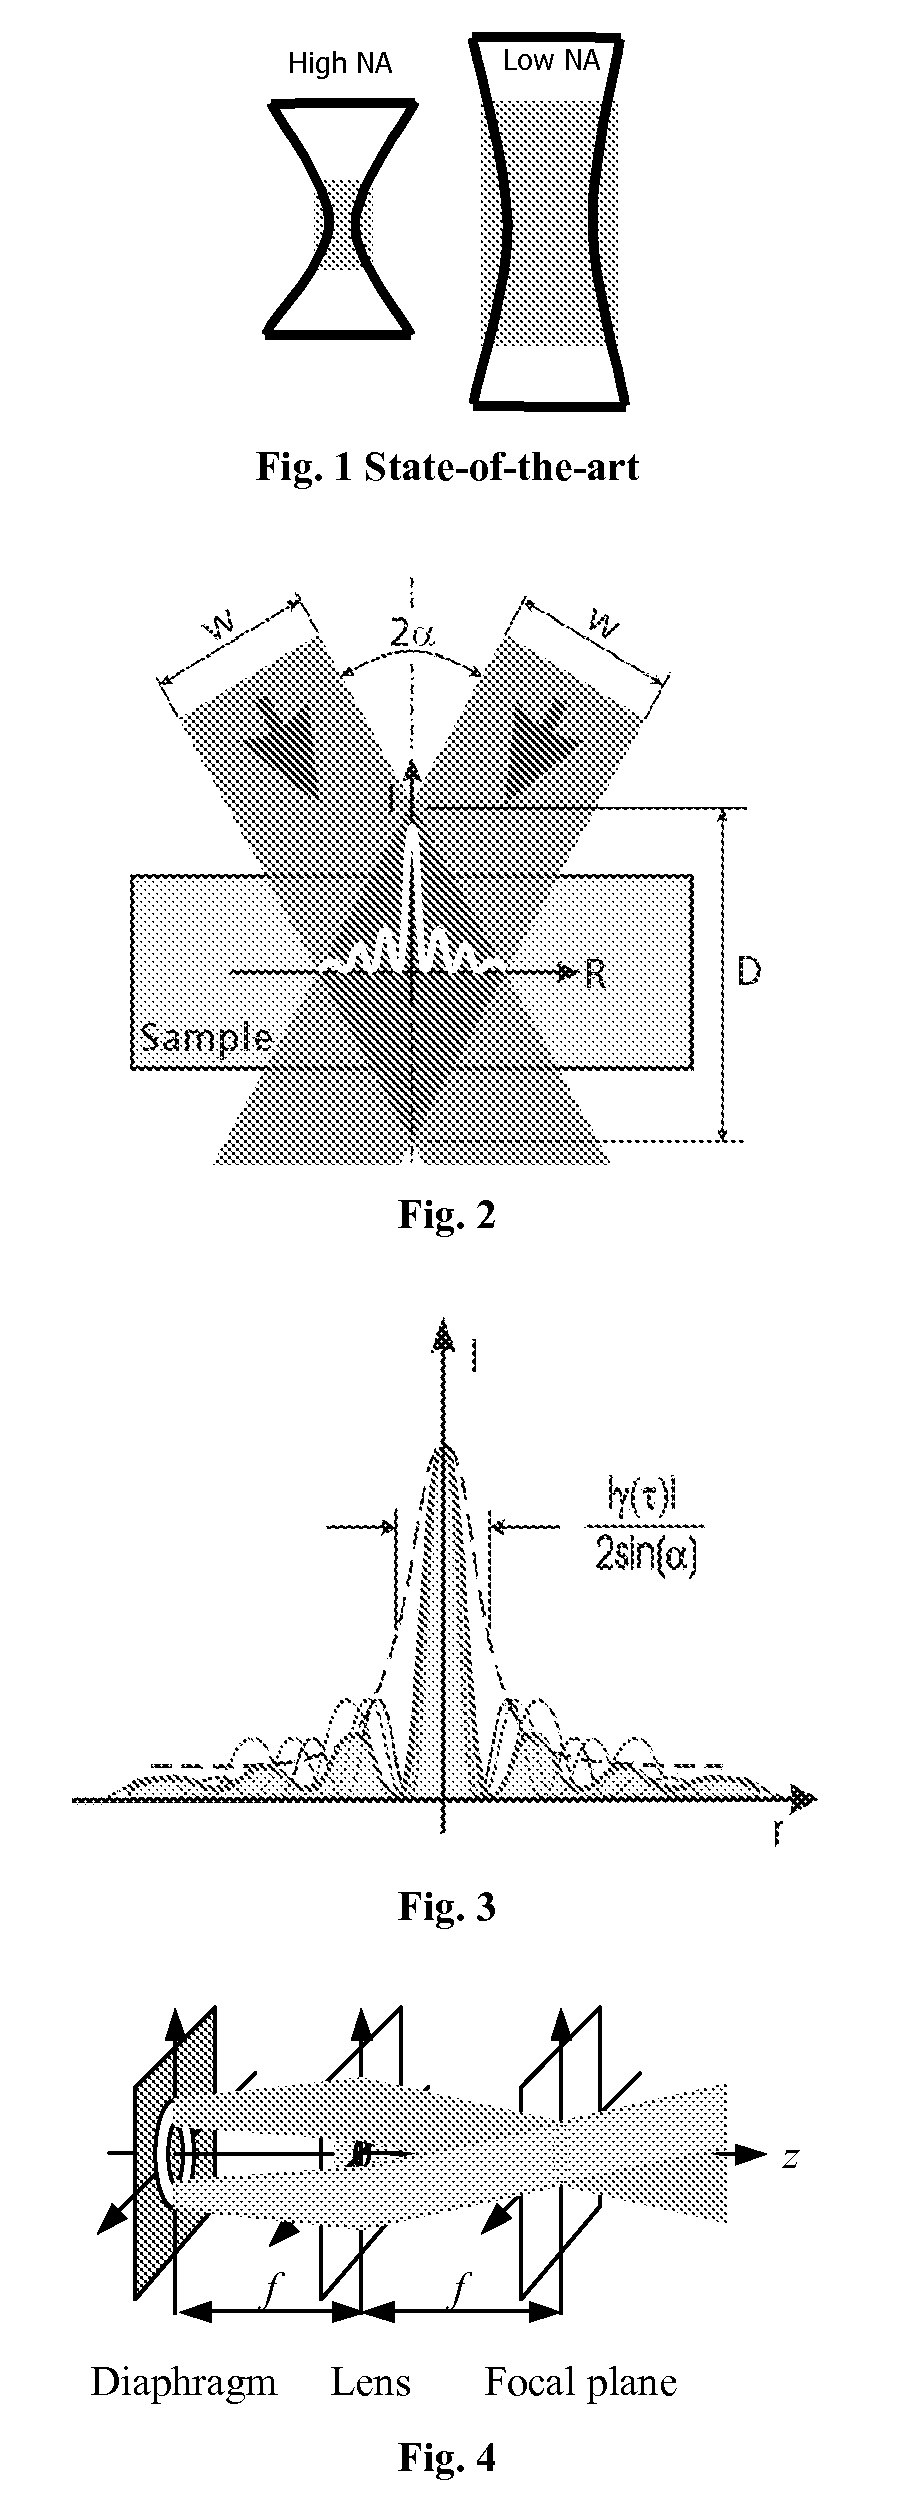 Optical imaging system with extended depth of focus